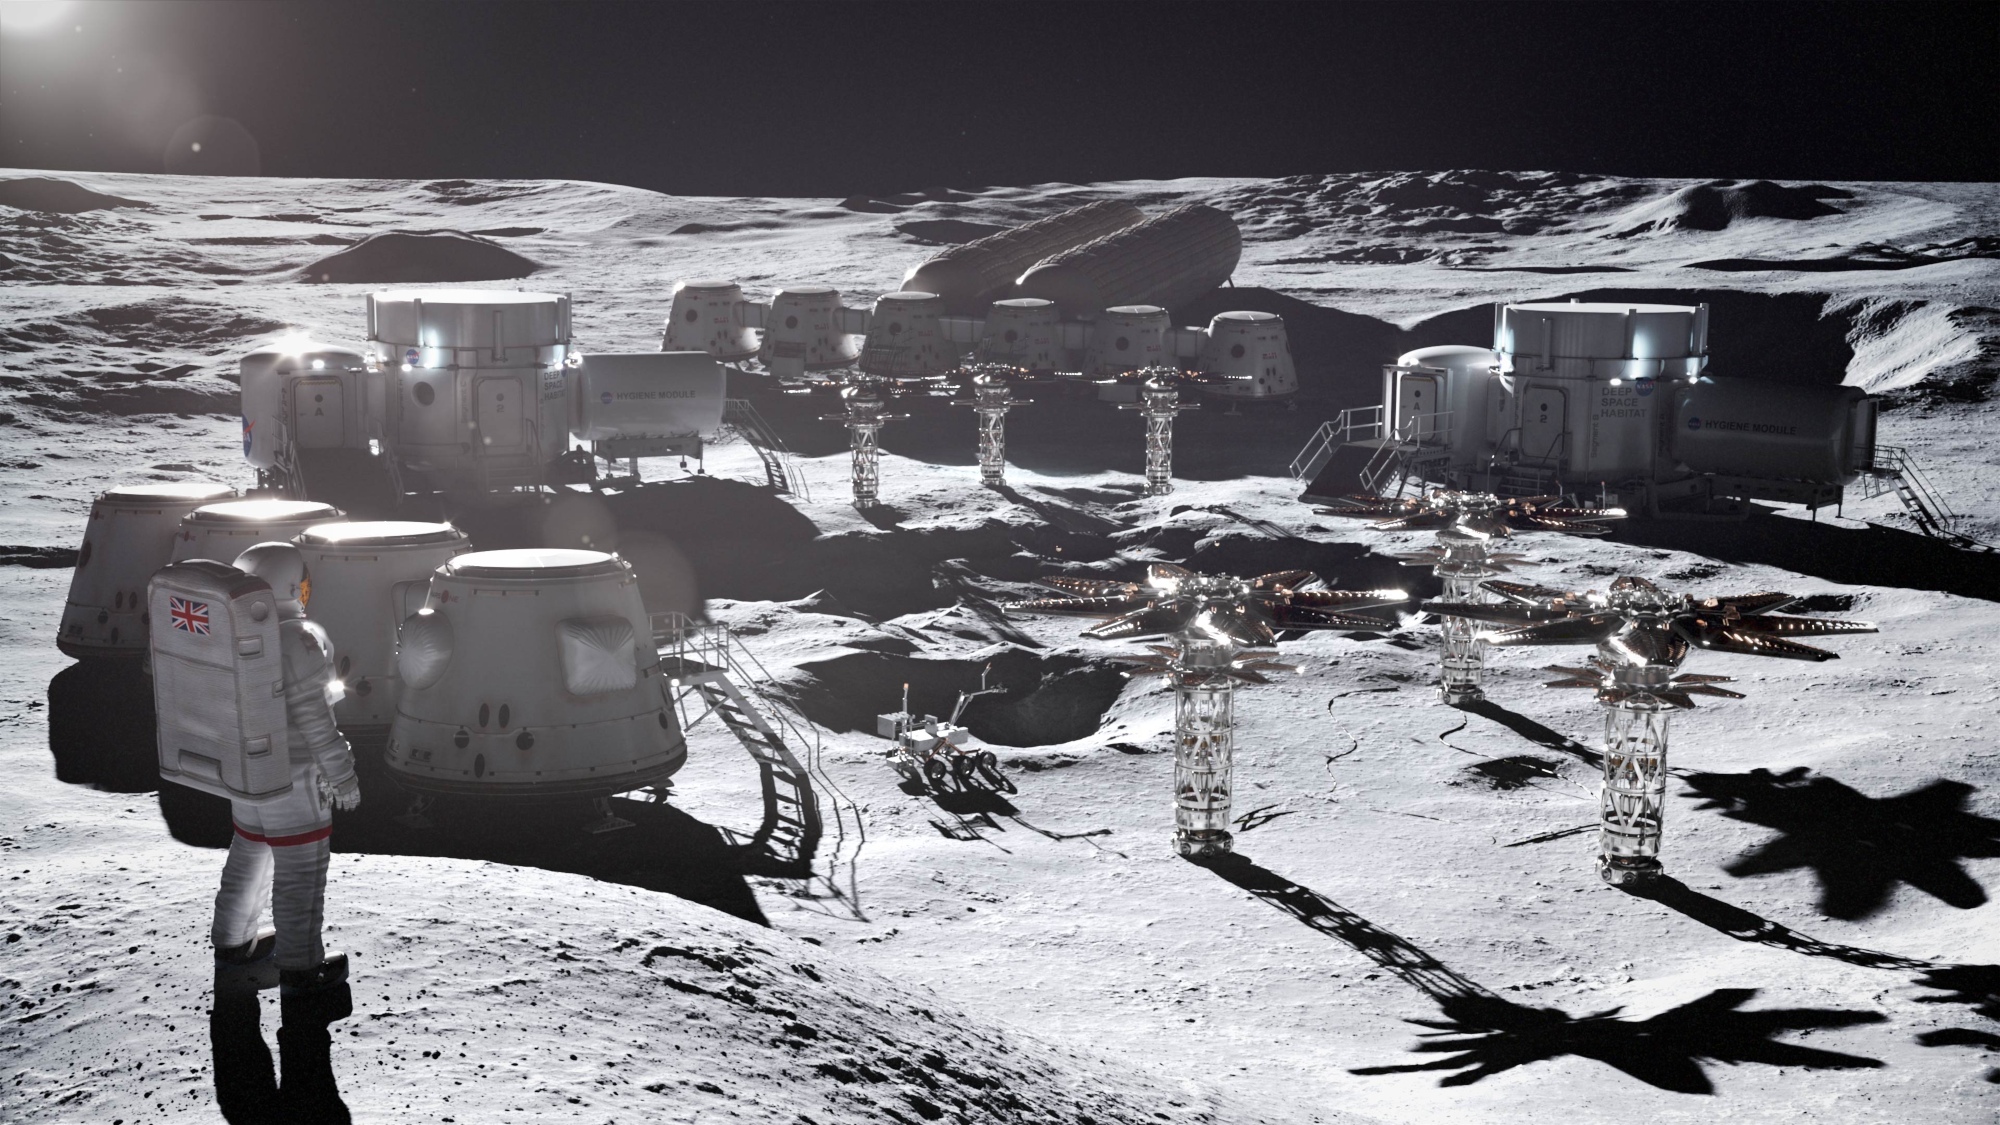 Micro-Reactors could provide the power for a Lunar base